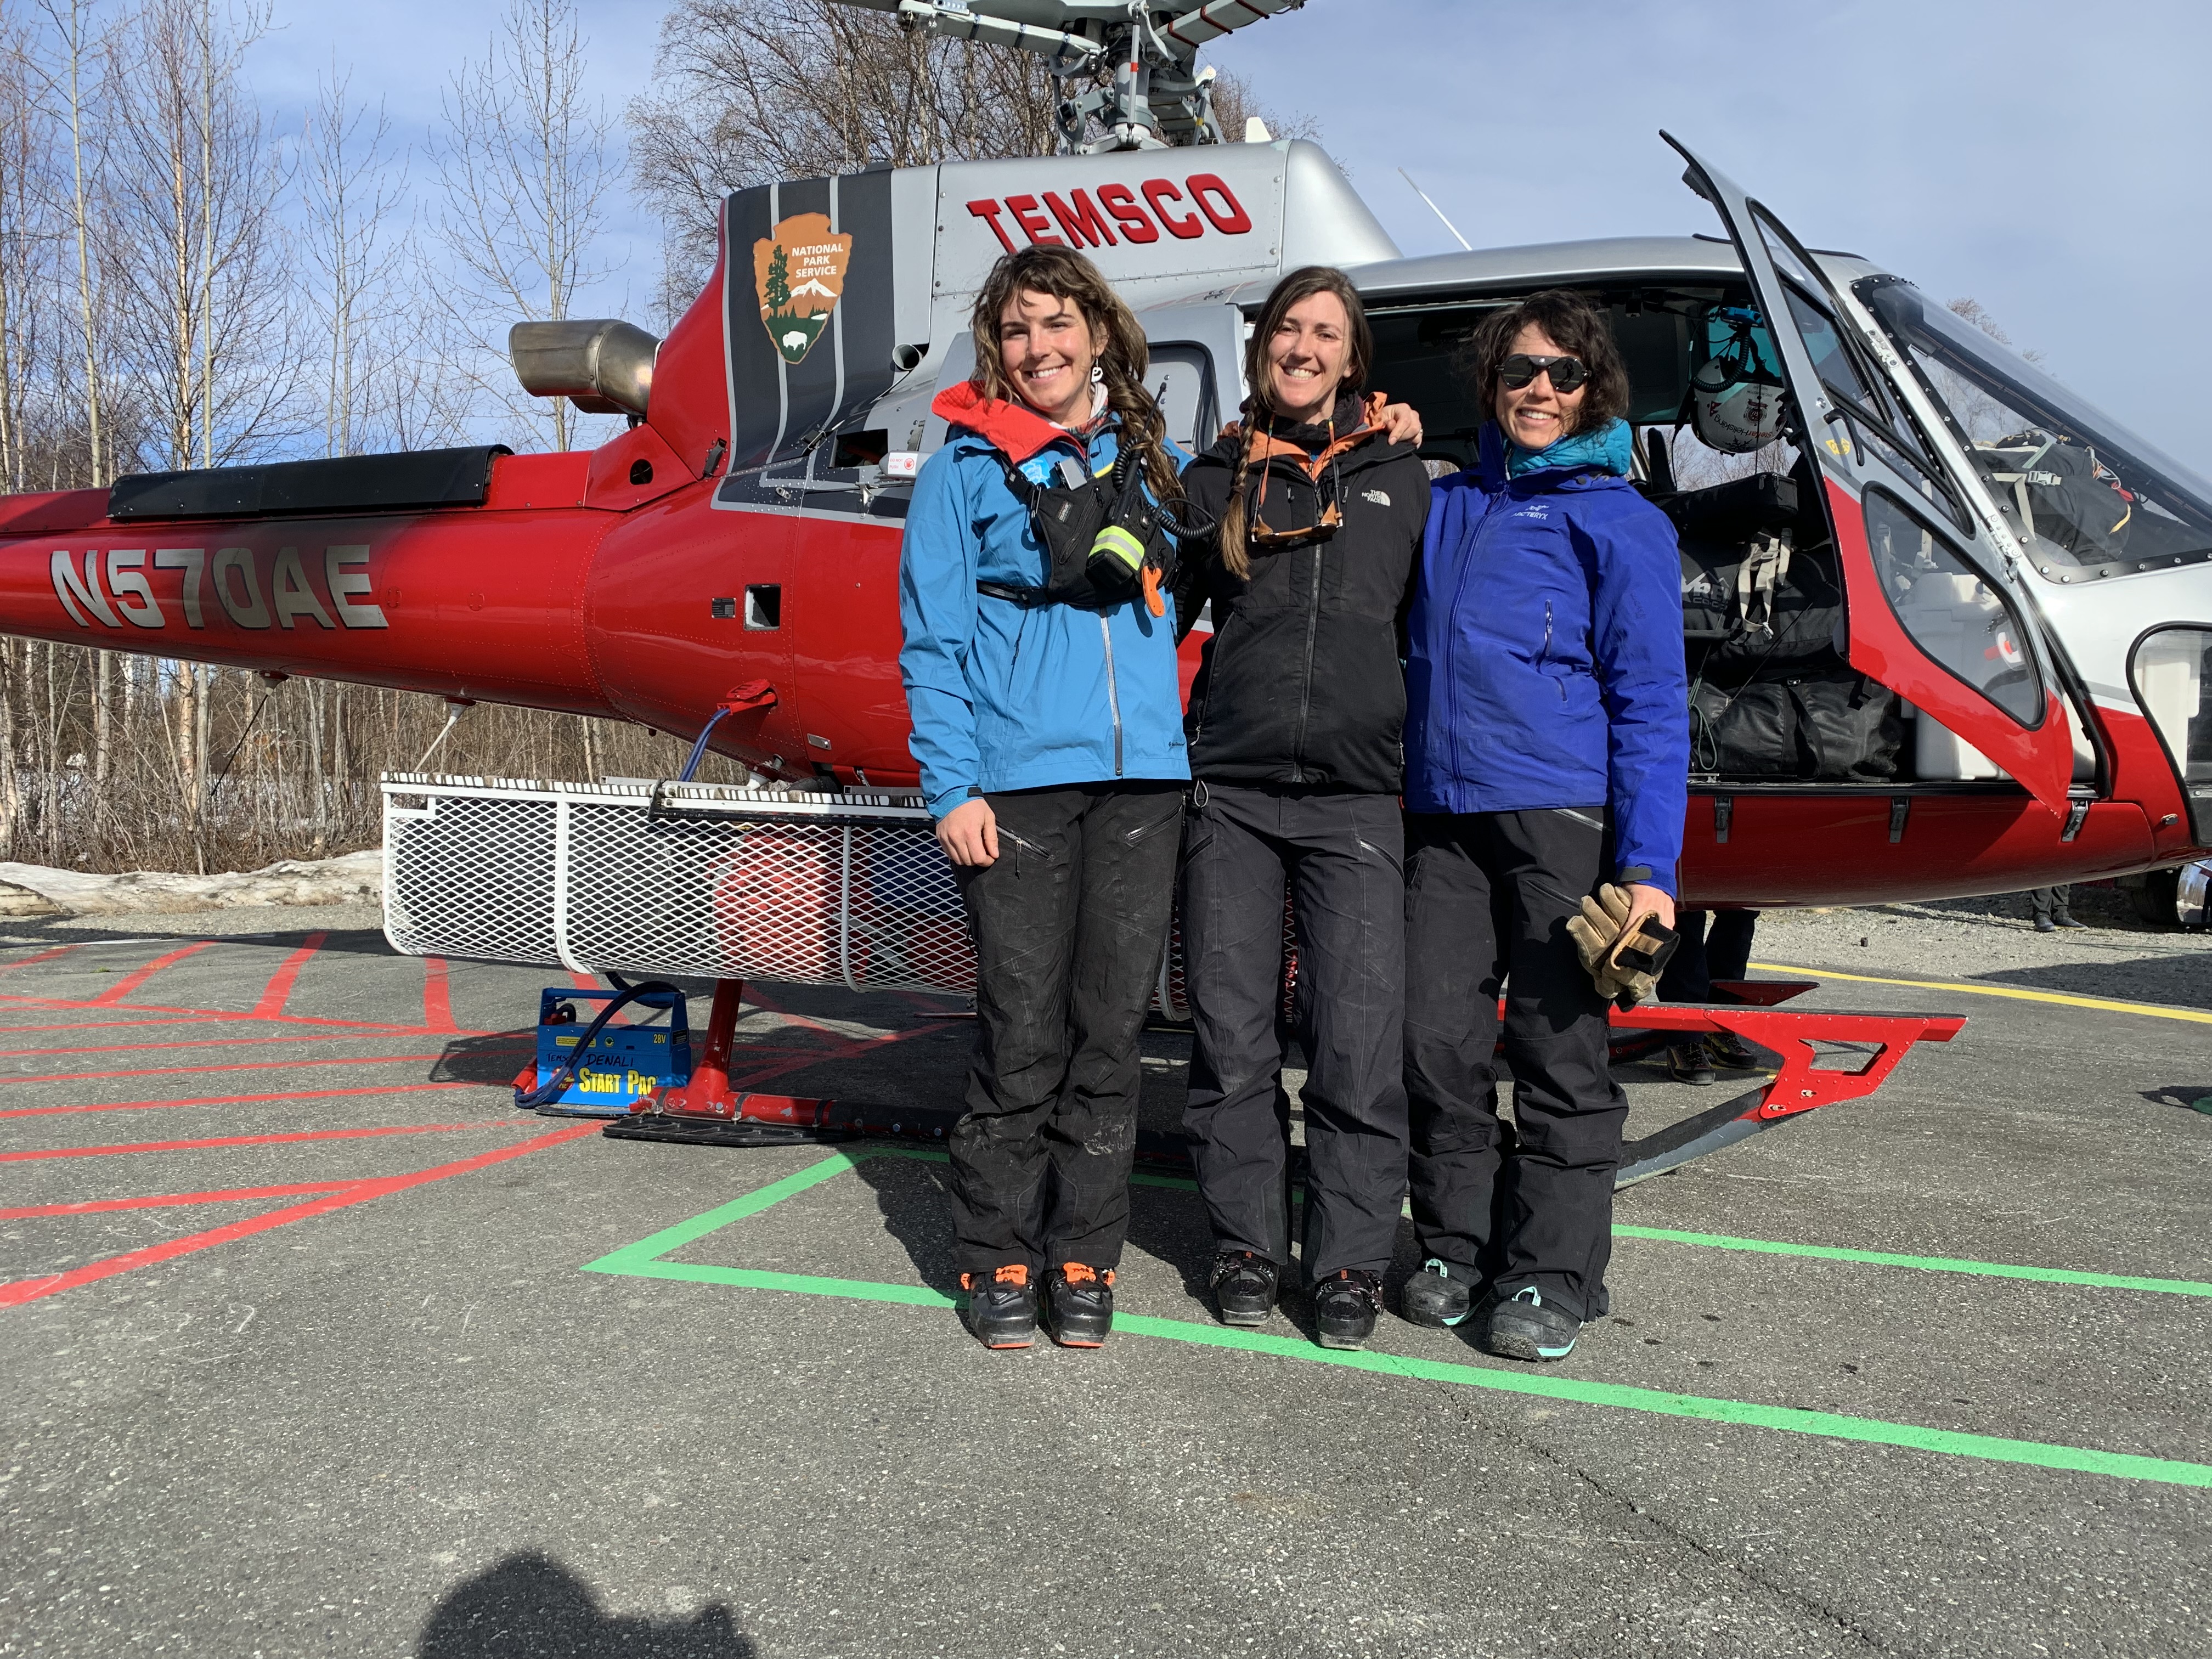 Three smiling climbers pose outside the NPS helicopter